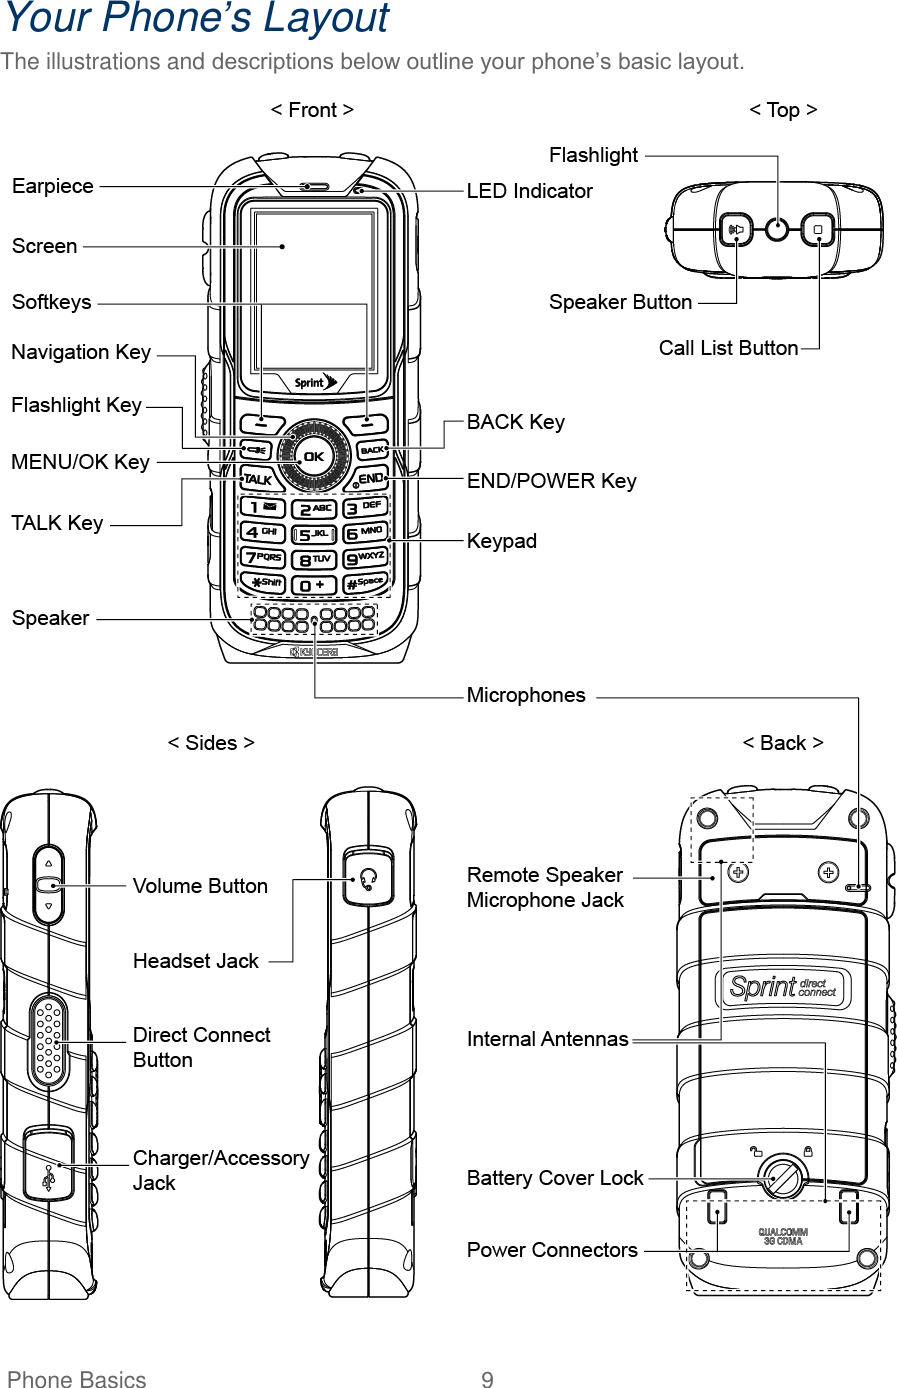   Phone Basics  9   Your Phone’s Layout The illustrations and descriptions below outline your phone‘s basic layout.  